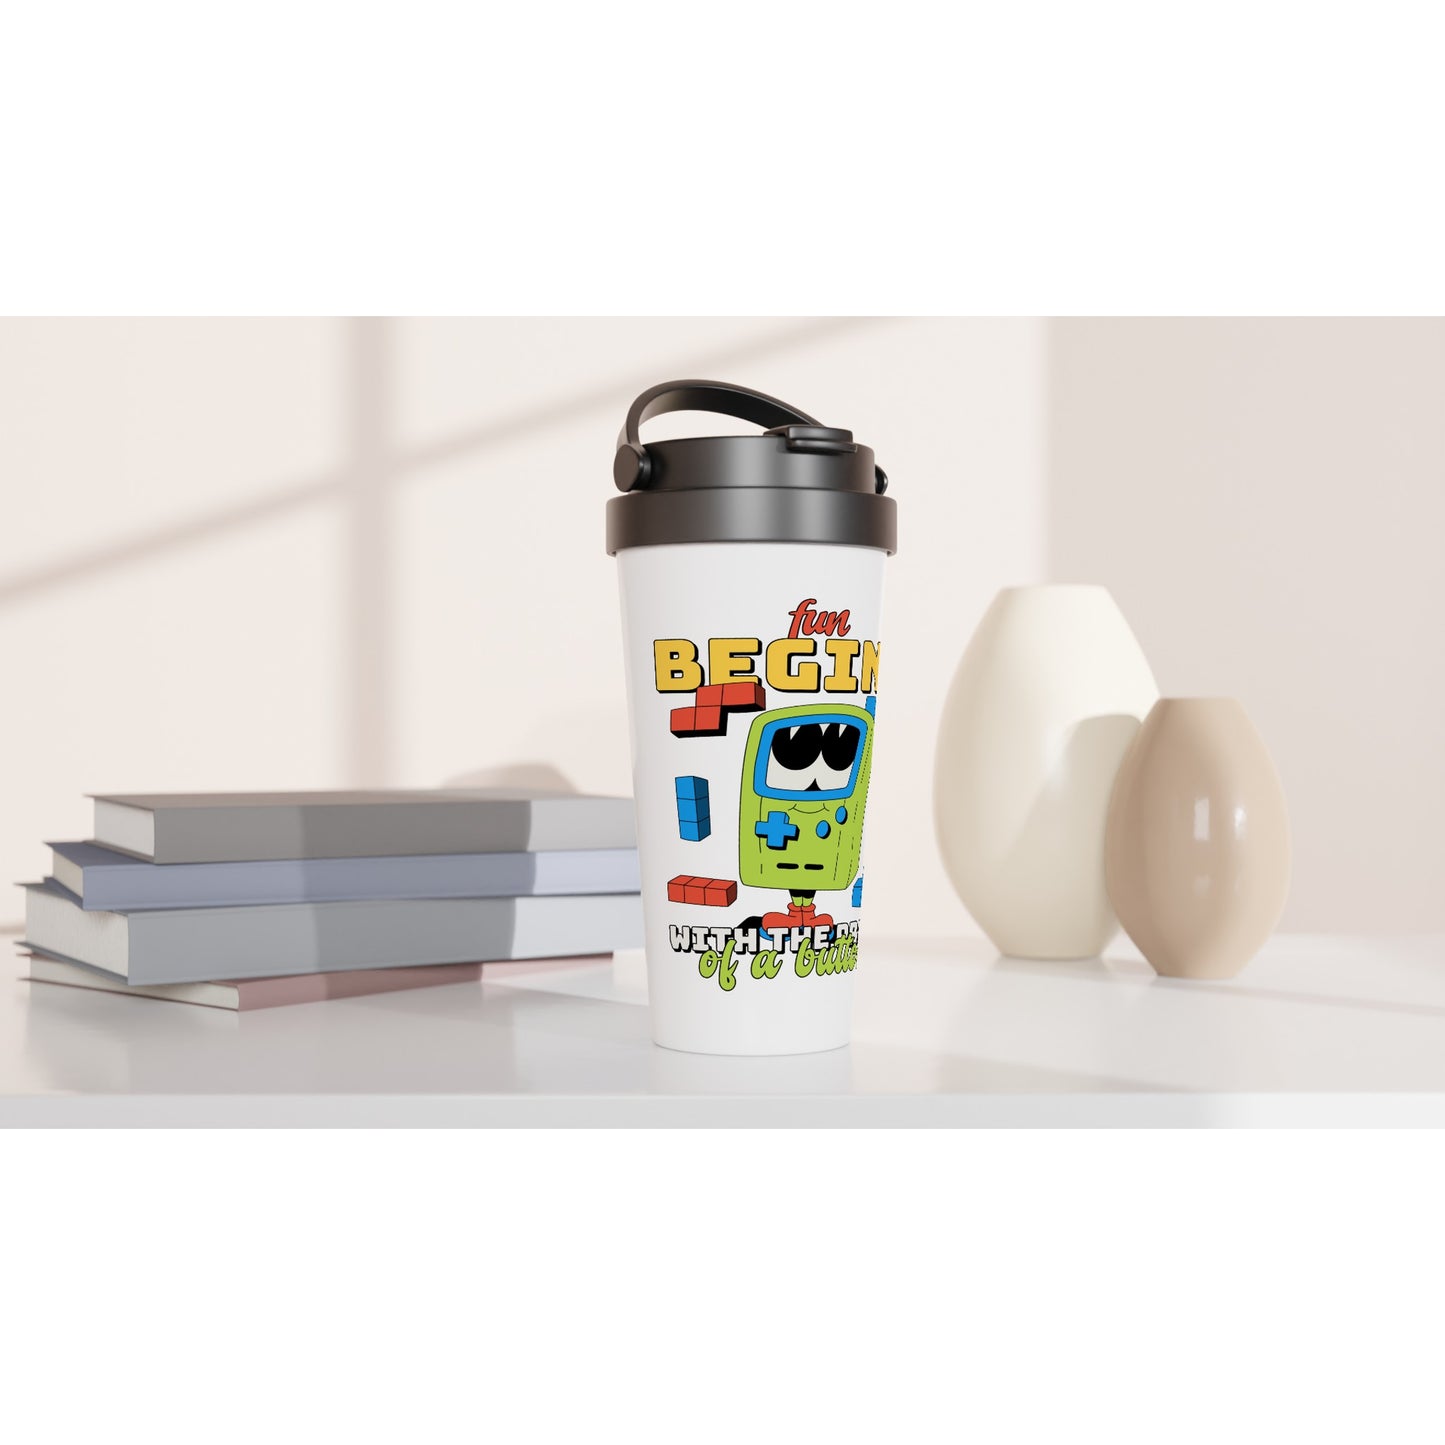 Fun Begins With The Press Of A Button - White 15oz Stainless Steel Travel Mug Travel Mug Games